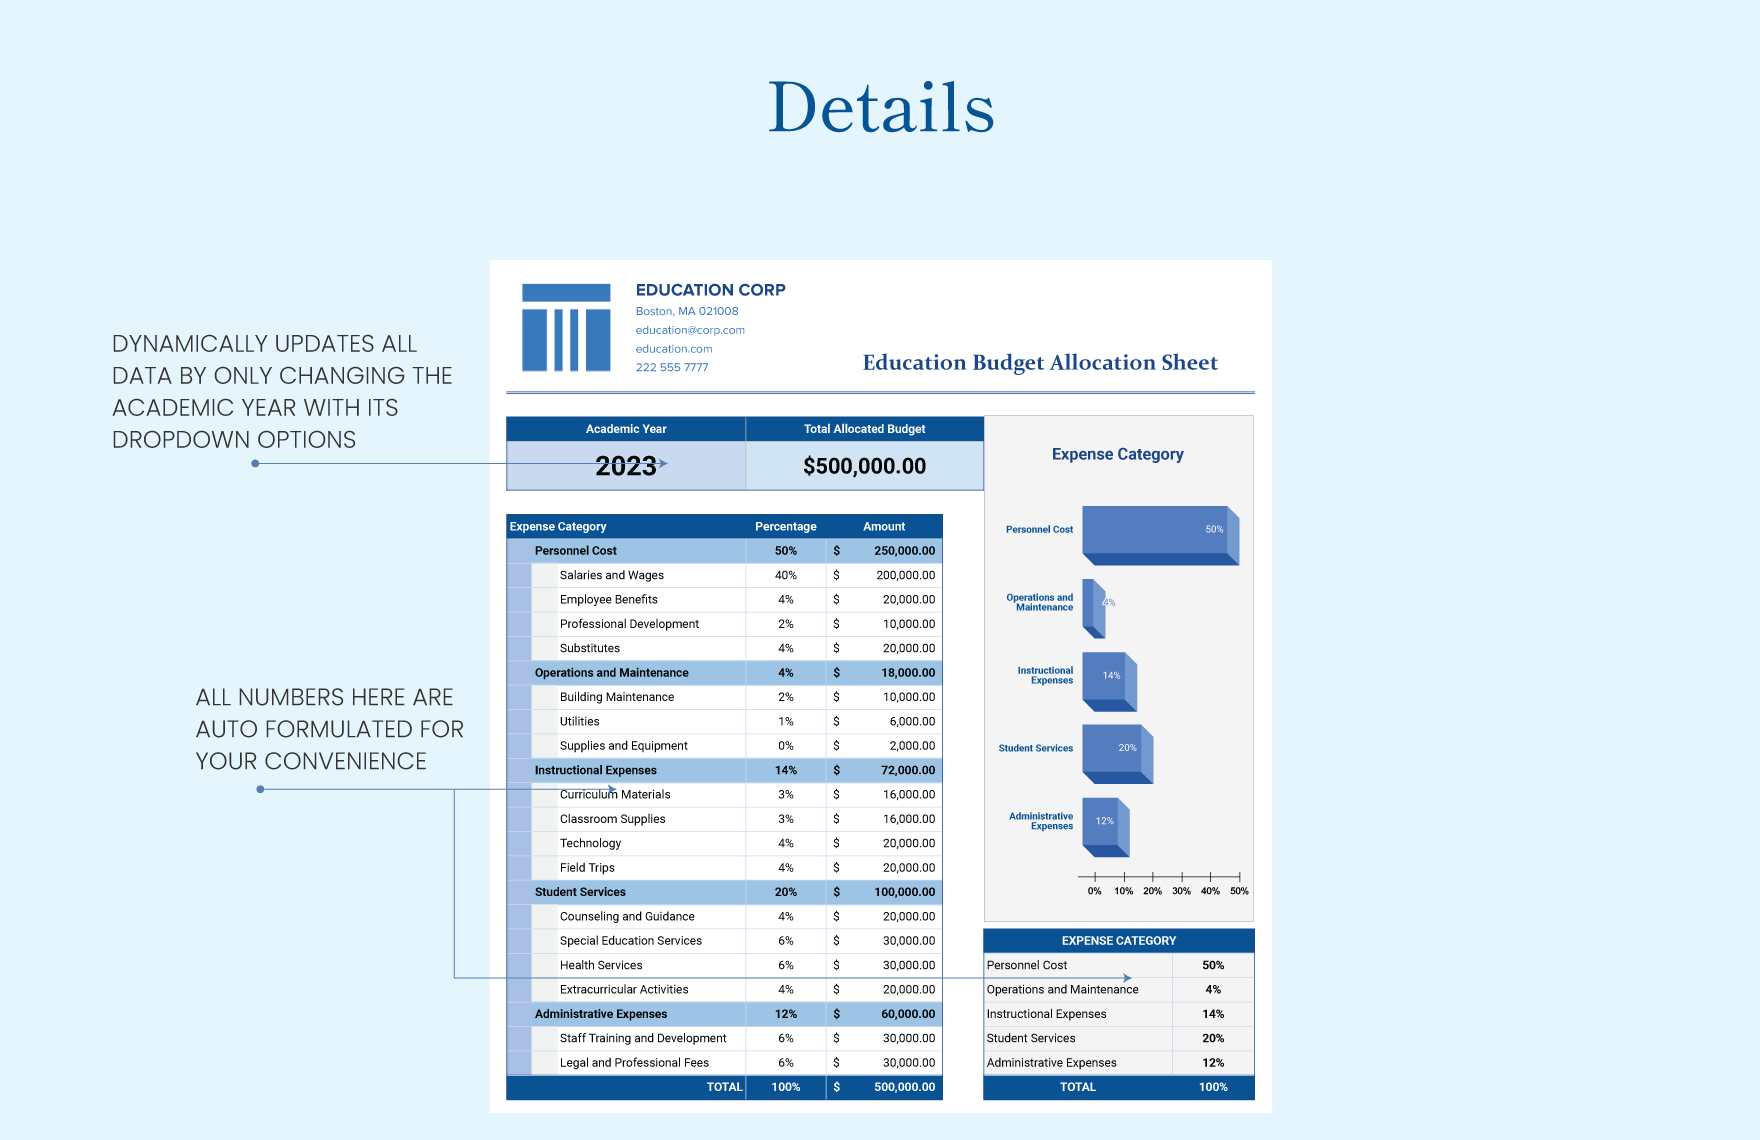 Education Budget Allocation Sheet Template